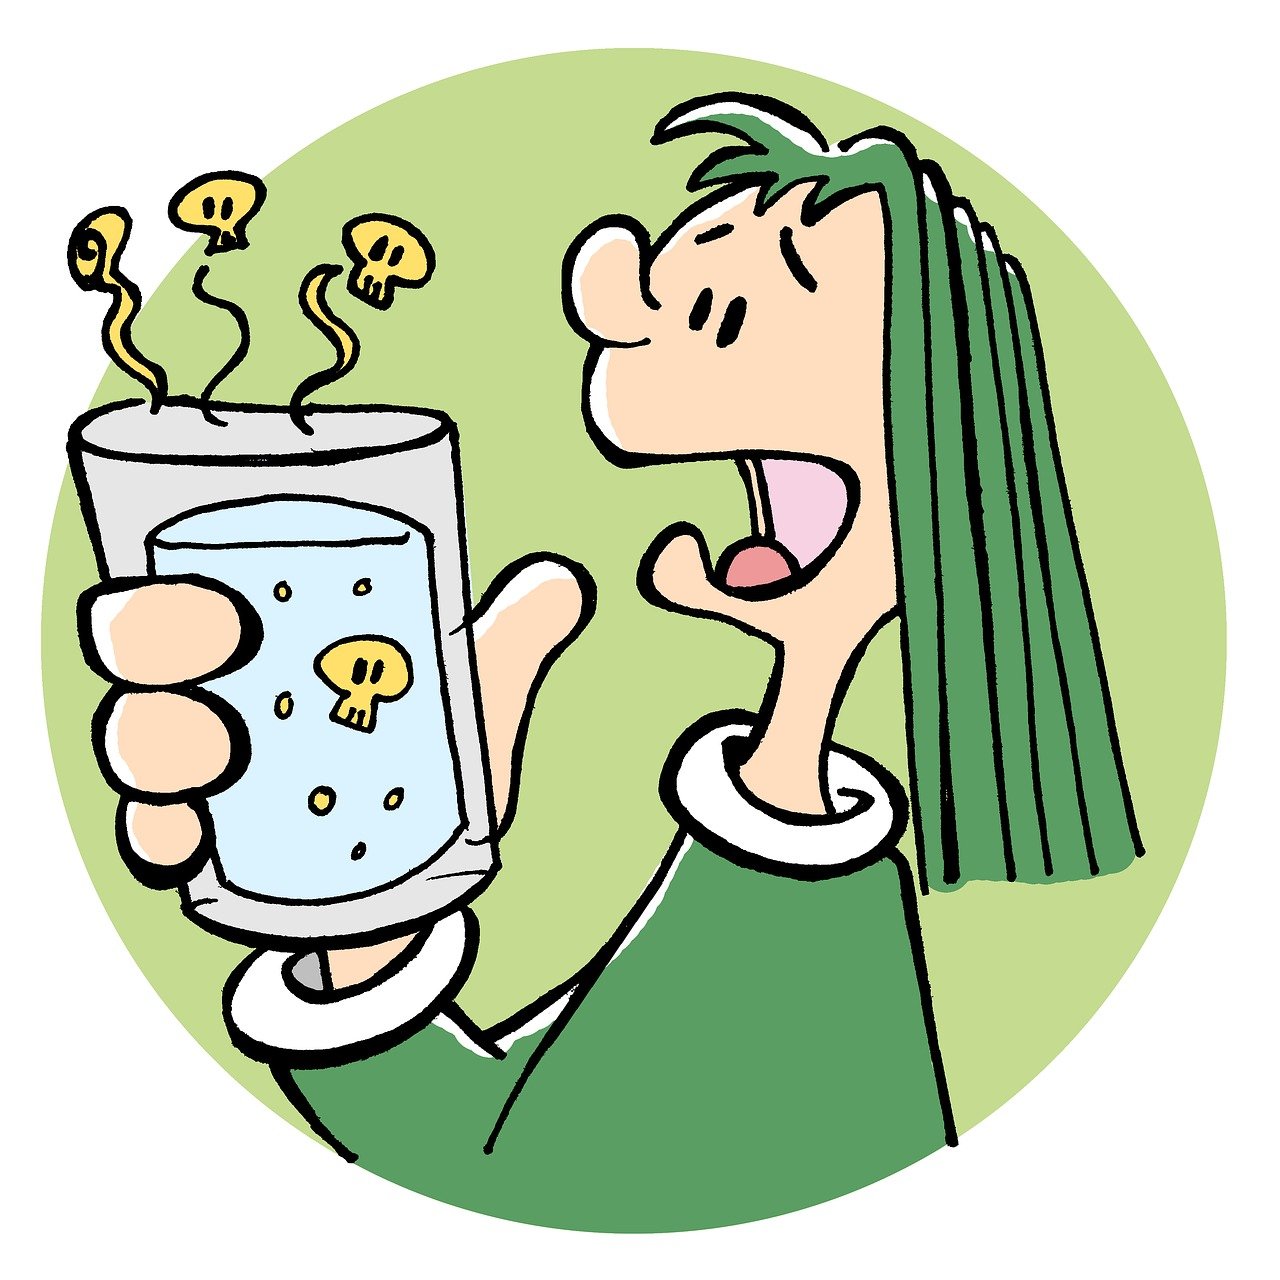 A cartoon person holding a glass of water with contaminants in it.